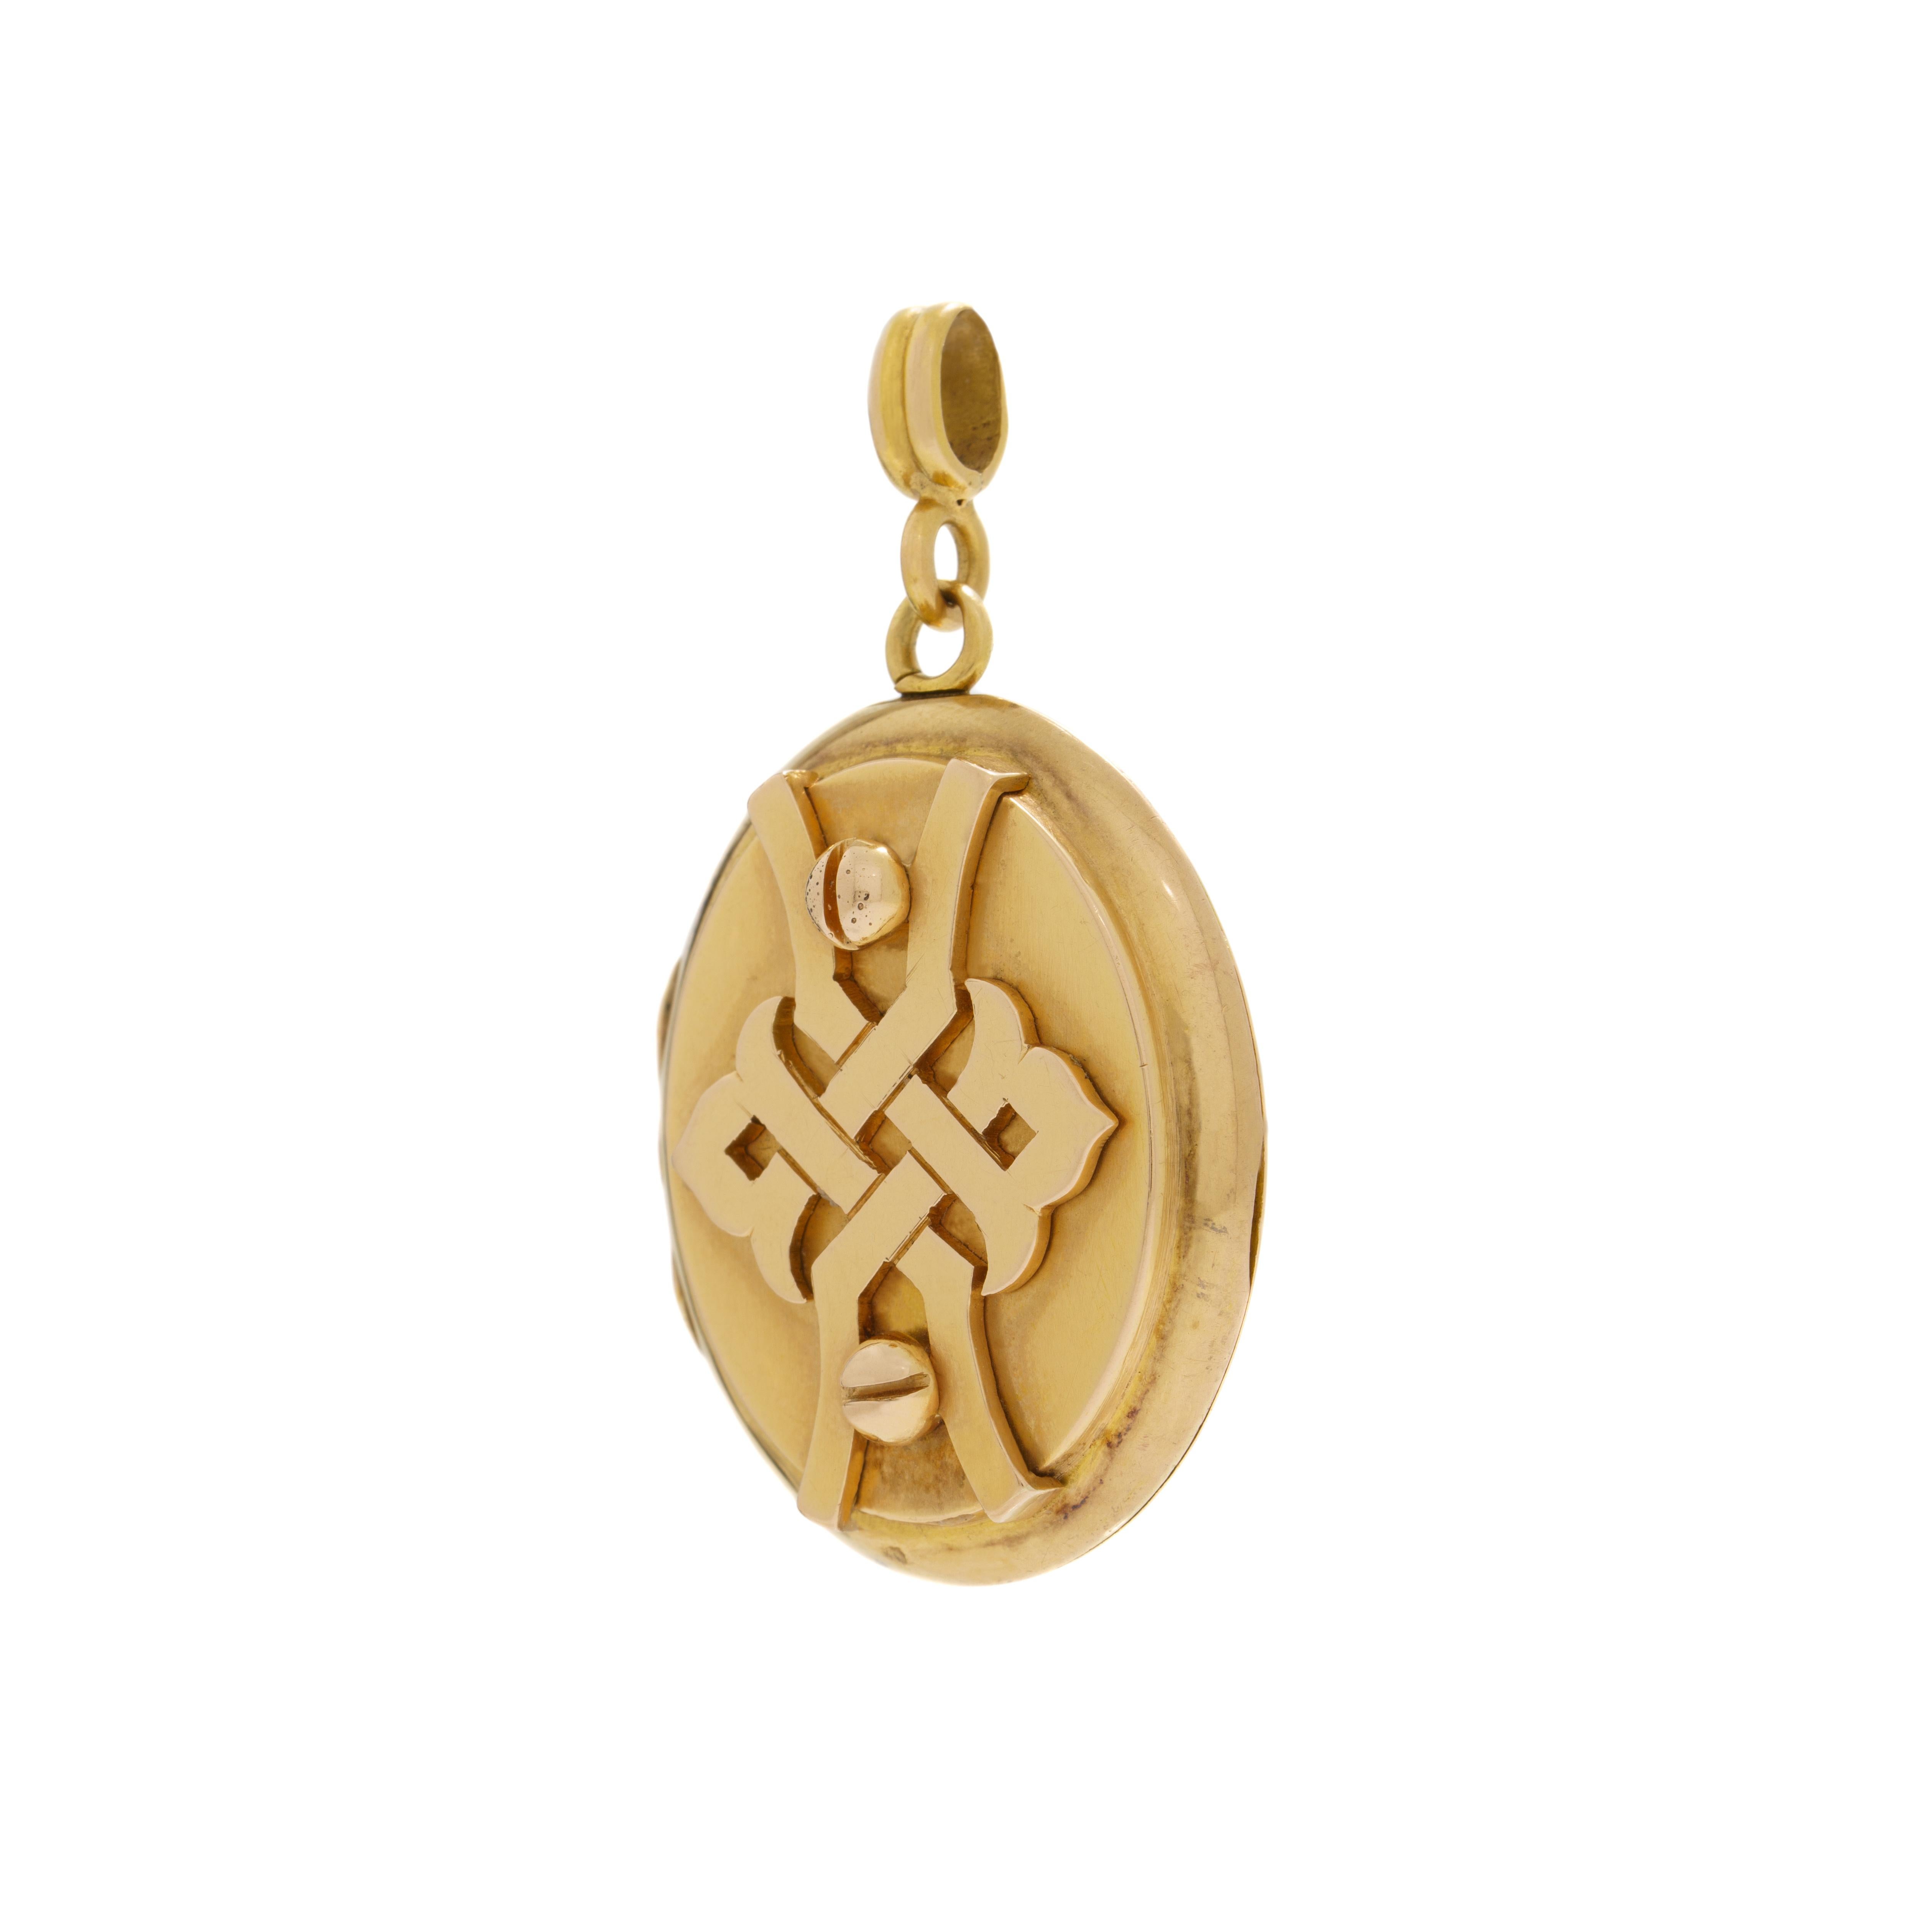 Art Nouveau 18 Karat Love Knot Motif Locket c.1900 In Good Condition For Sale In New York, NY